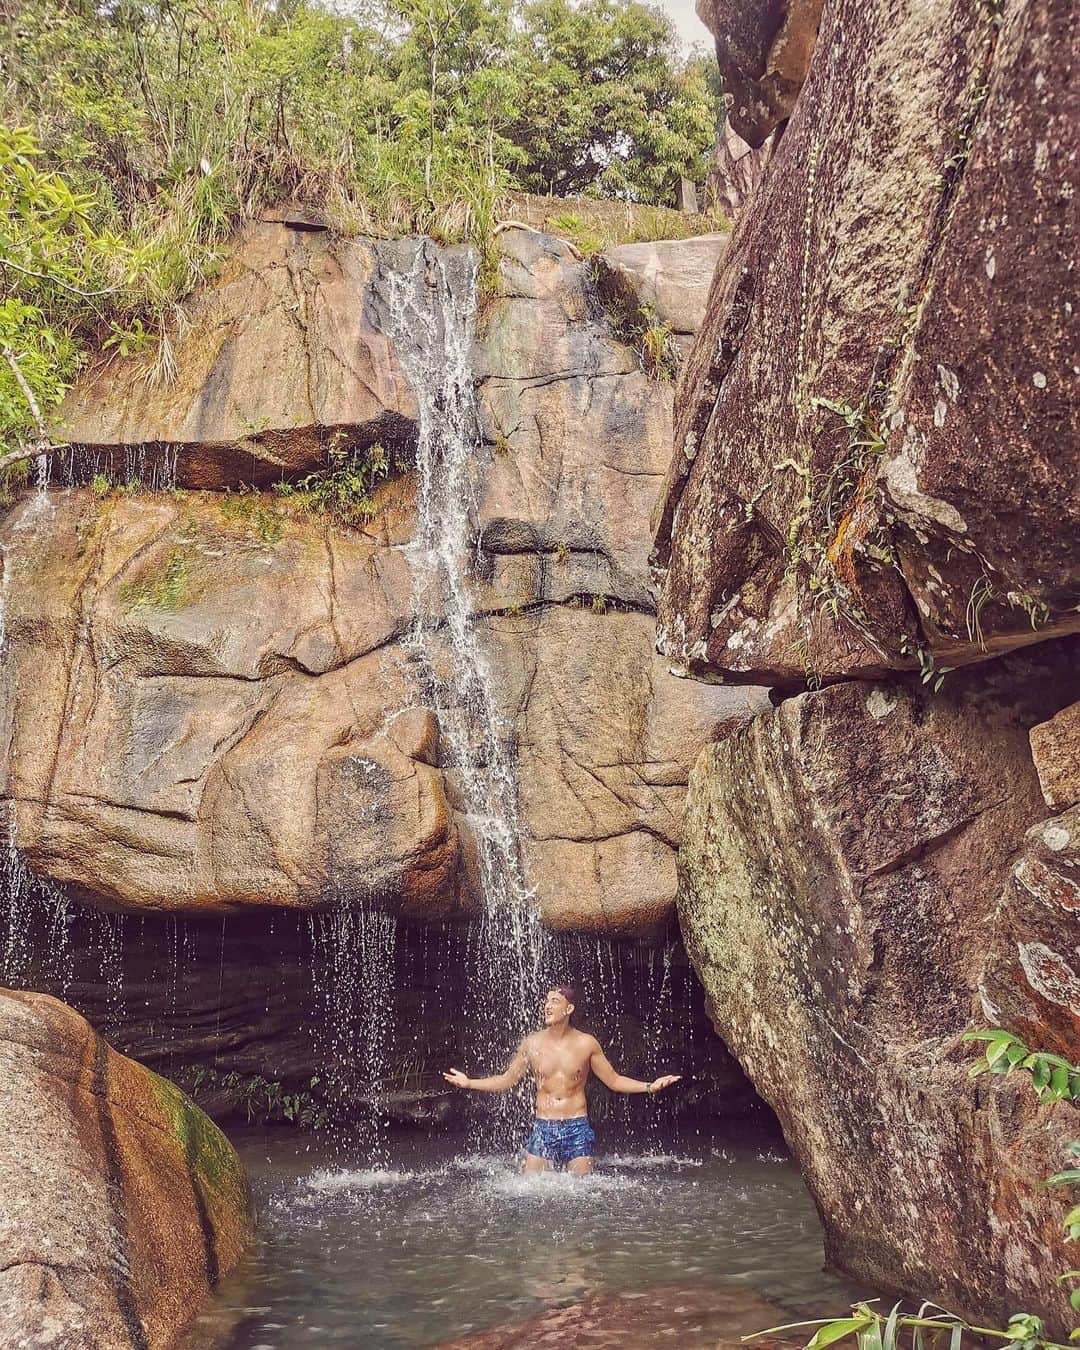 Kam Wai Suenのインスタグラム：「Another week end another waterfall ?  With all the public facilities and the gyms closed I had the opportunity to explore Hong Kong and discover more gems 😍 but soon I will have to keep the t-shirt on 😅 #waterfall #hkhiker #hkhiking #hikersofinstagram #hikingadventures #lifestyleblogger #hkkol #hkinfluencer #fitnesslifestyle #fitnessfun #explorehongkong #discoverhongkong」